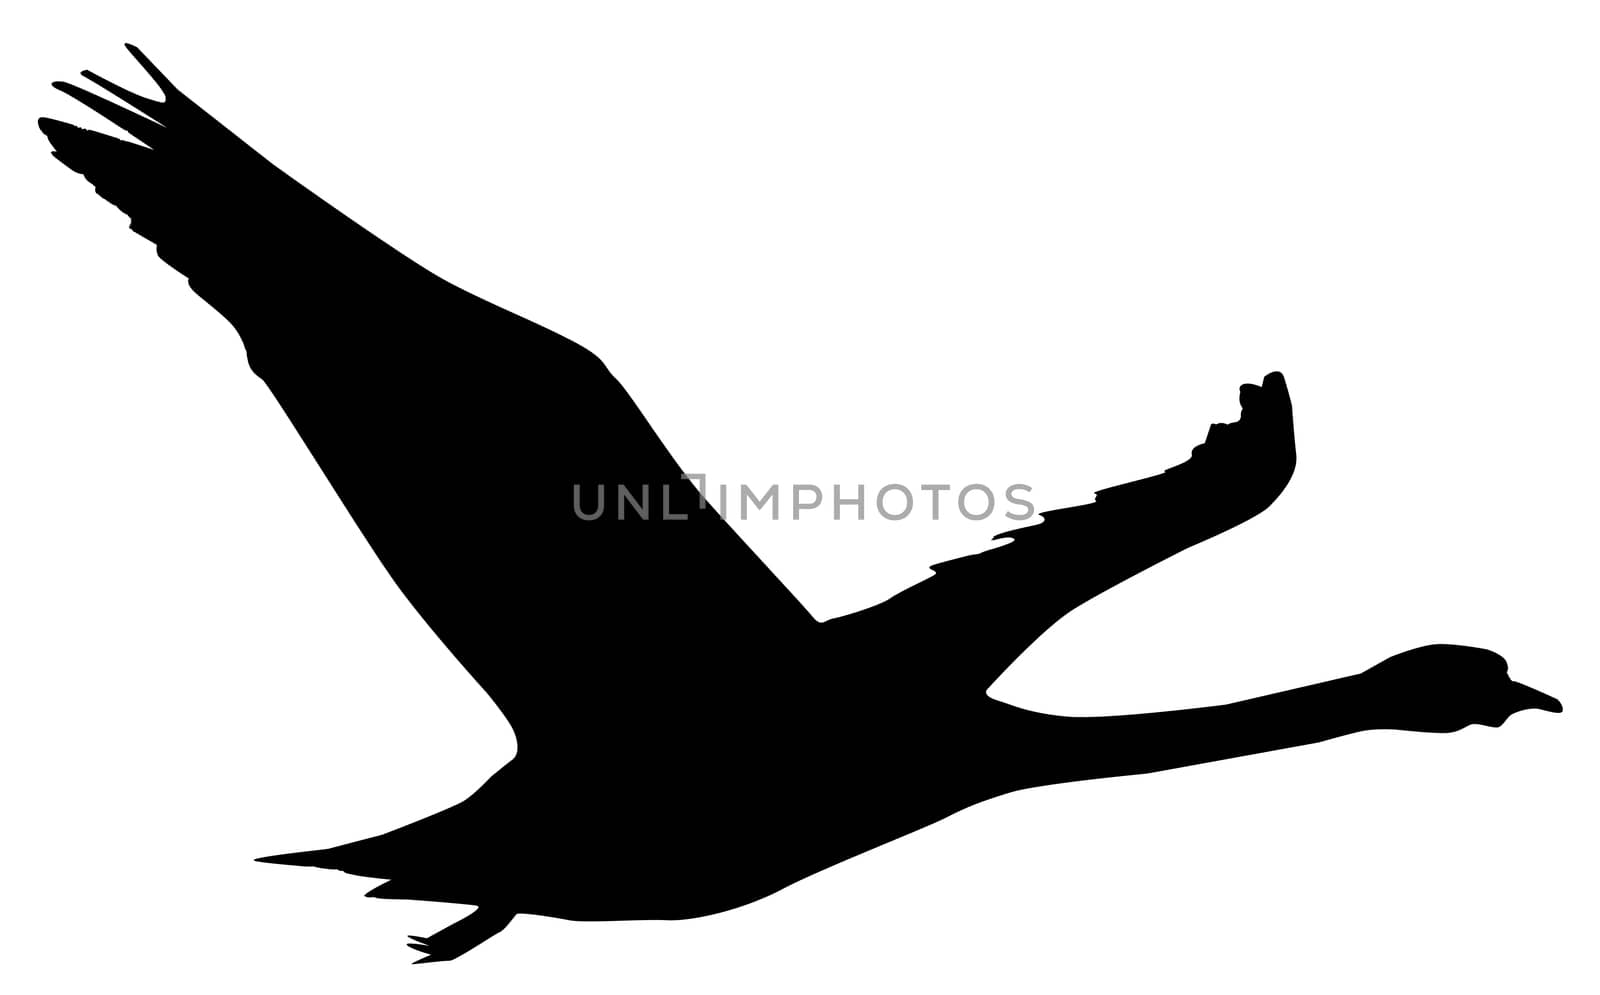 a silouette of a swan flying isolated over white.